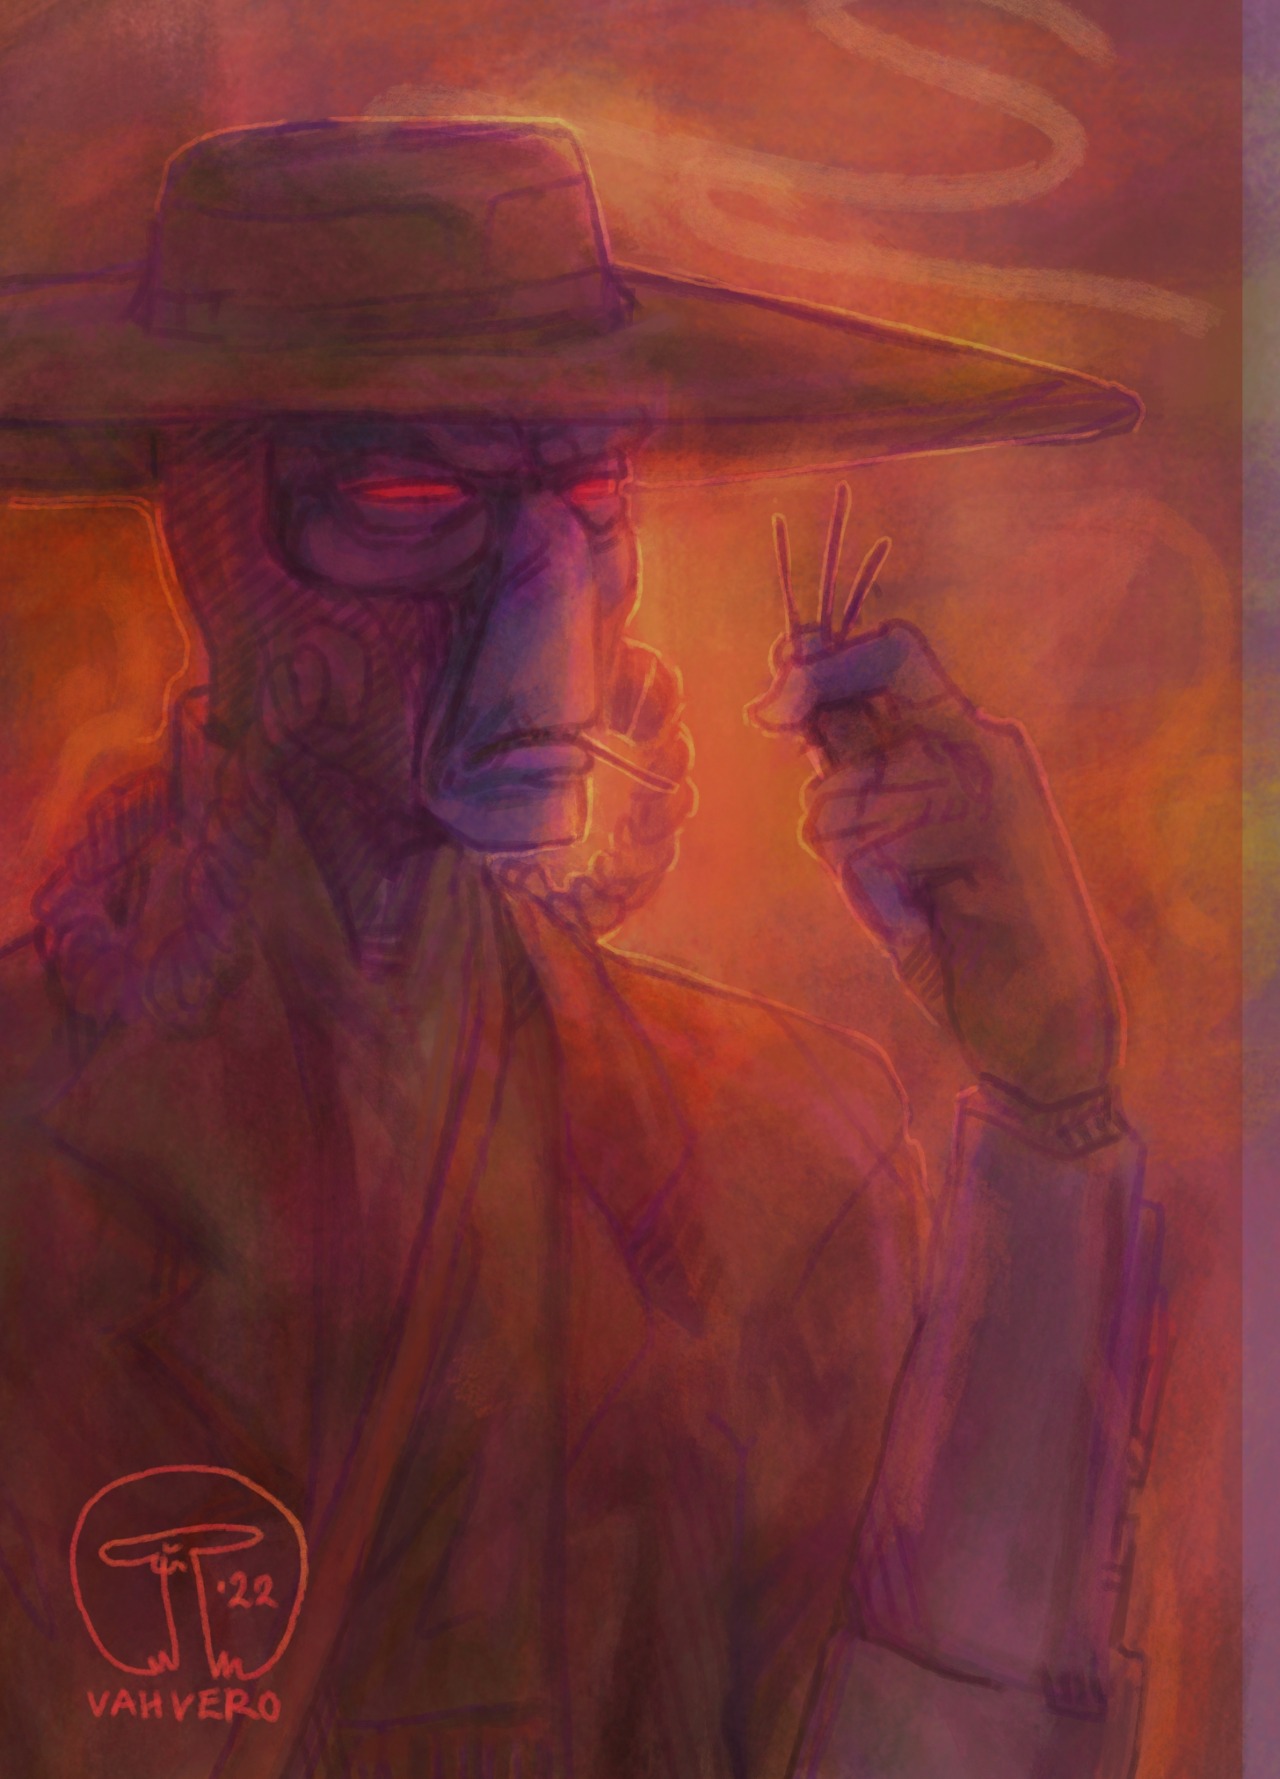 Here with my latest blorbo obsession #cad bane#star wars#clone wars#sw#sw cw #the man loves his toothpicks #my art#vahvero#krita #a break from editing a video for schoolwork turned into bane hours dont judge me